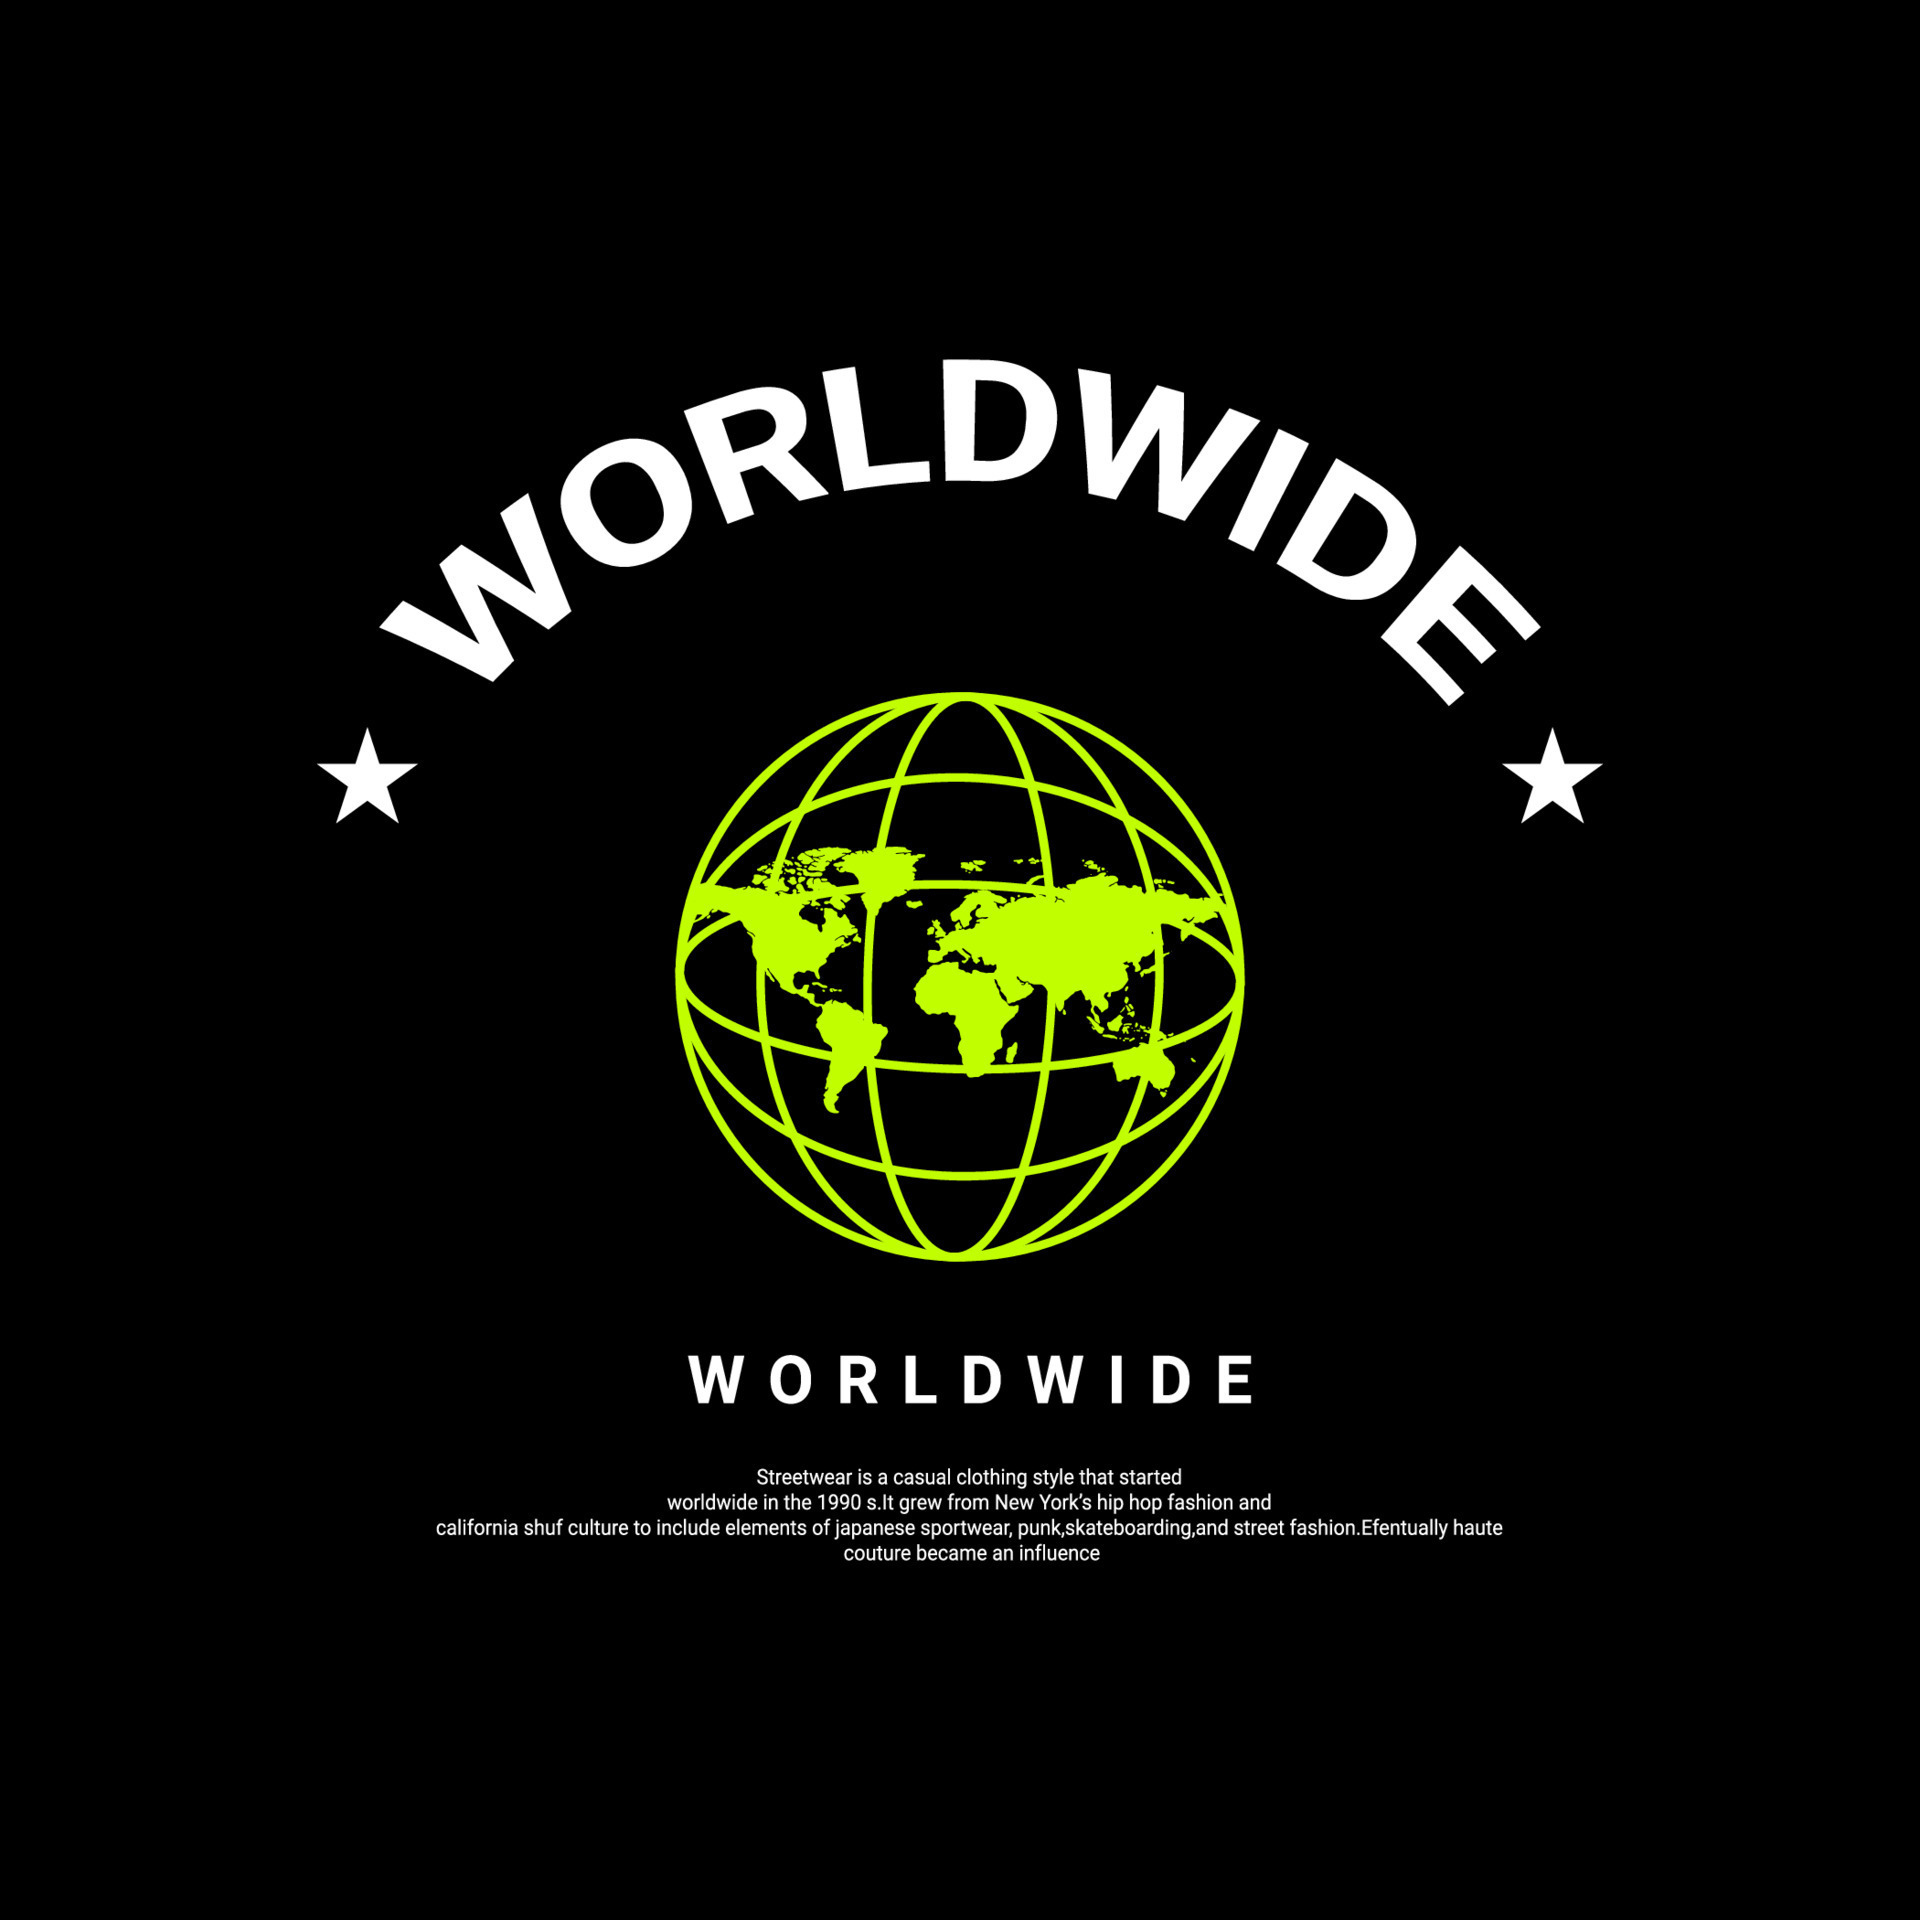 Worldwide writing design, suitable for screen printing t-shirts ...